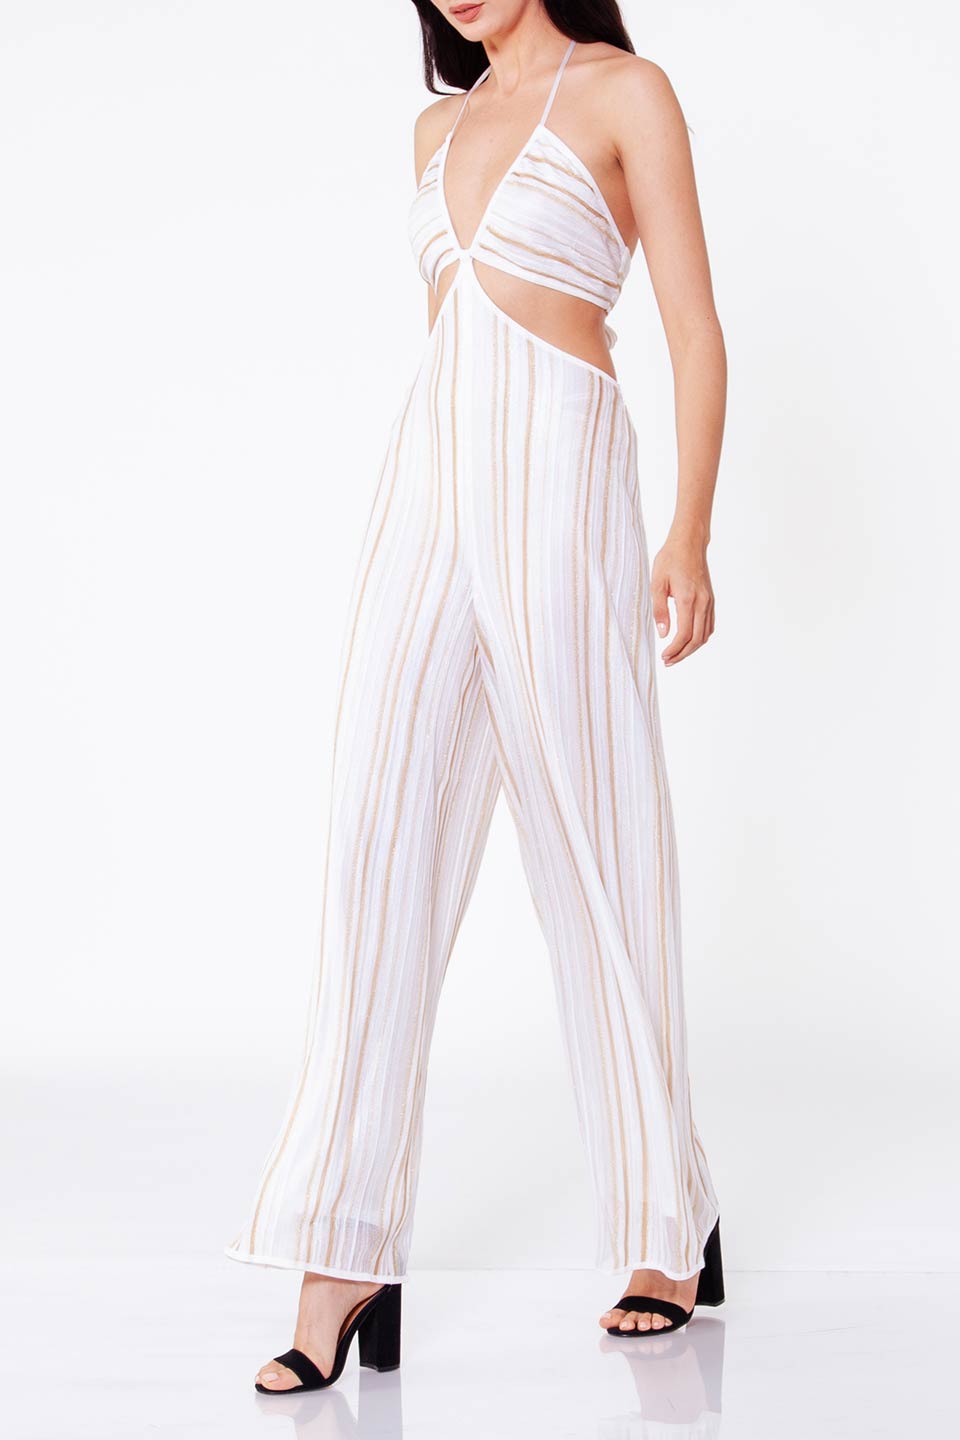 Designer White Jumpsuits, shop online with free delivery in UAE. Product gallery 7